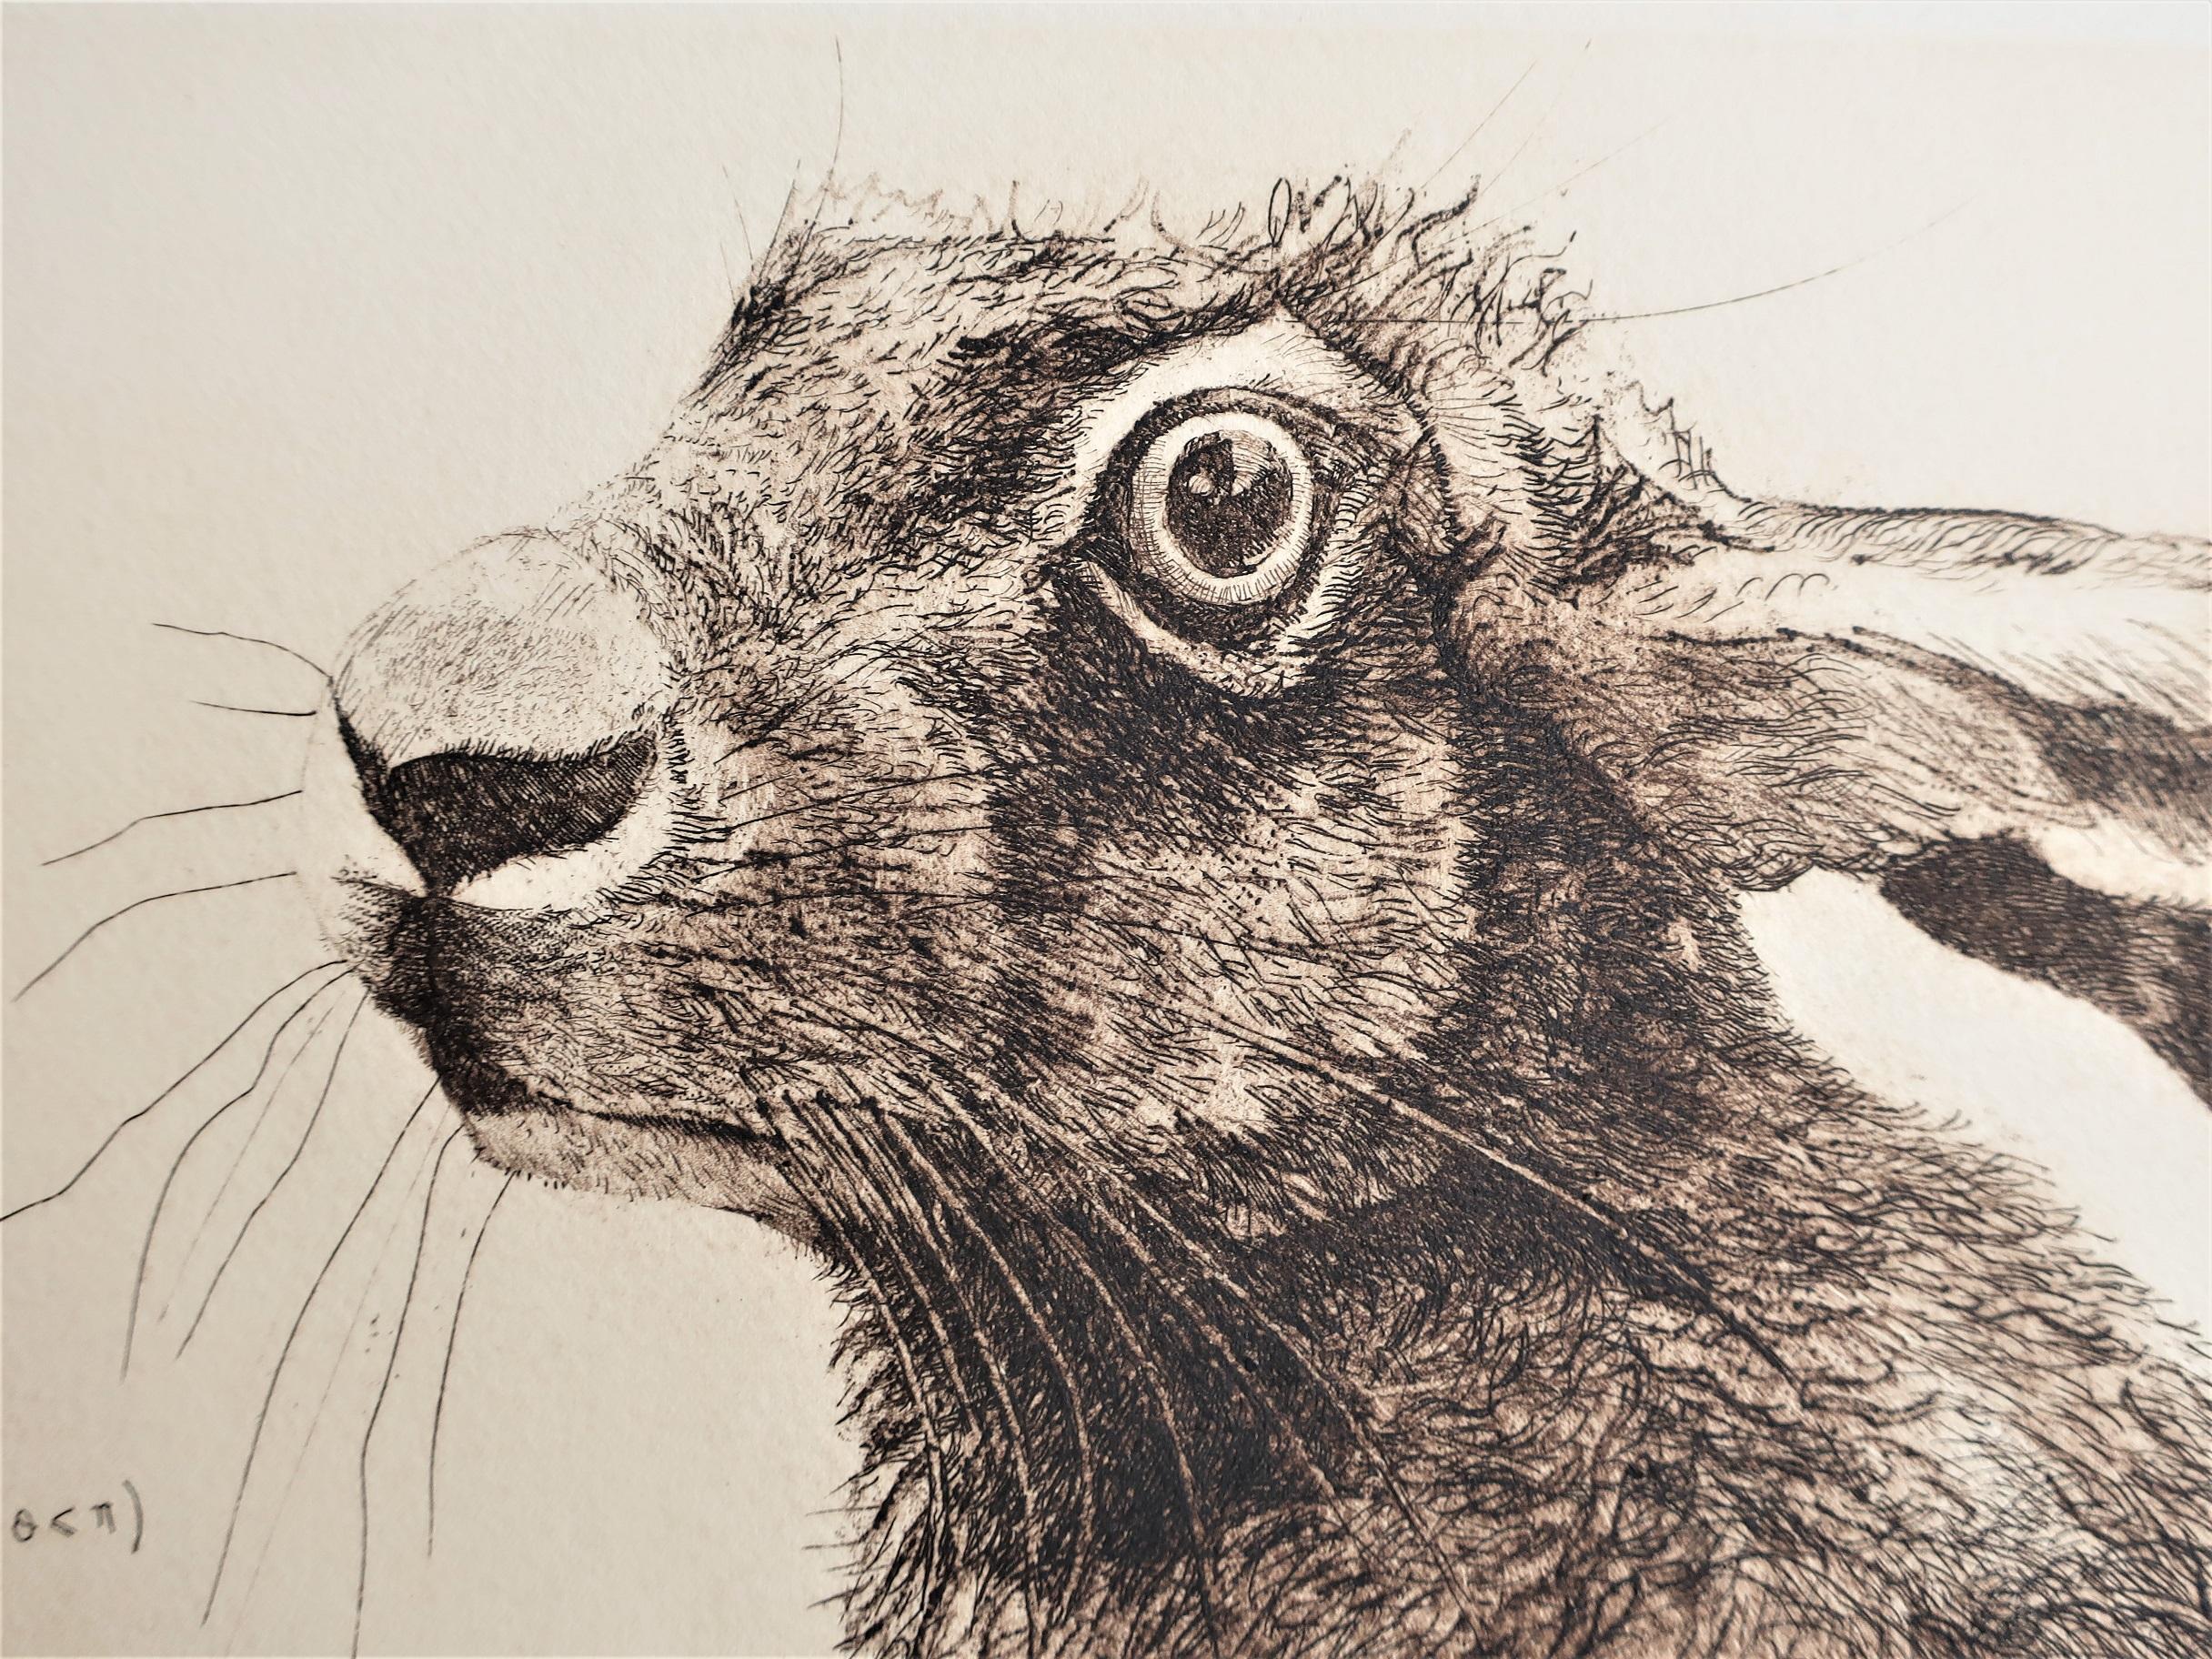 WILL TAYLOR
Archimedes’ Hare
Original limited edition of 30 – printed by the artist on Somerset 300gsm Cotton paper
Copper-plate etching
Image size W 30 cm x H 40 cm
Sheet size W 47 cm x H 56 x D 0.2cm
Sold unframed

Please note that in situ images